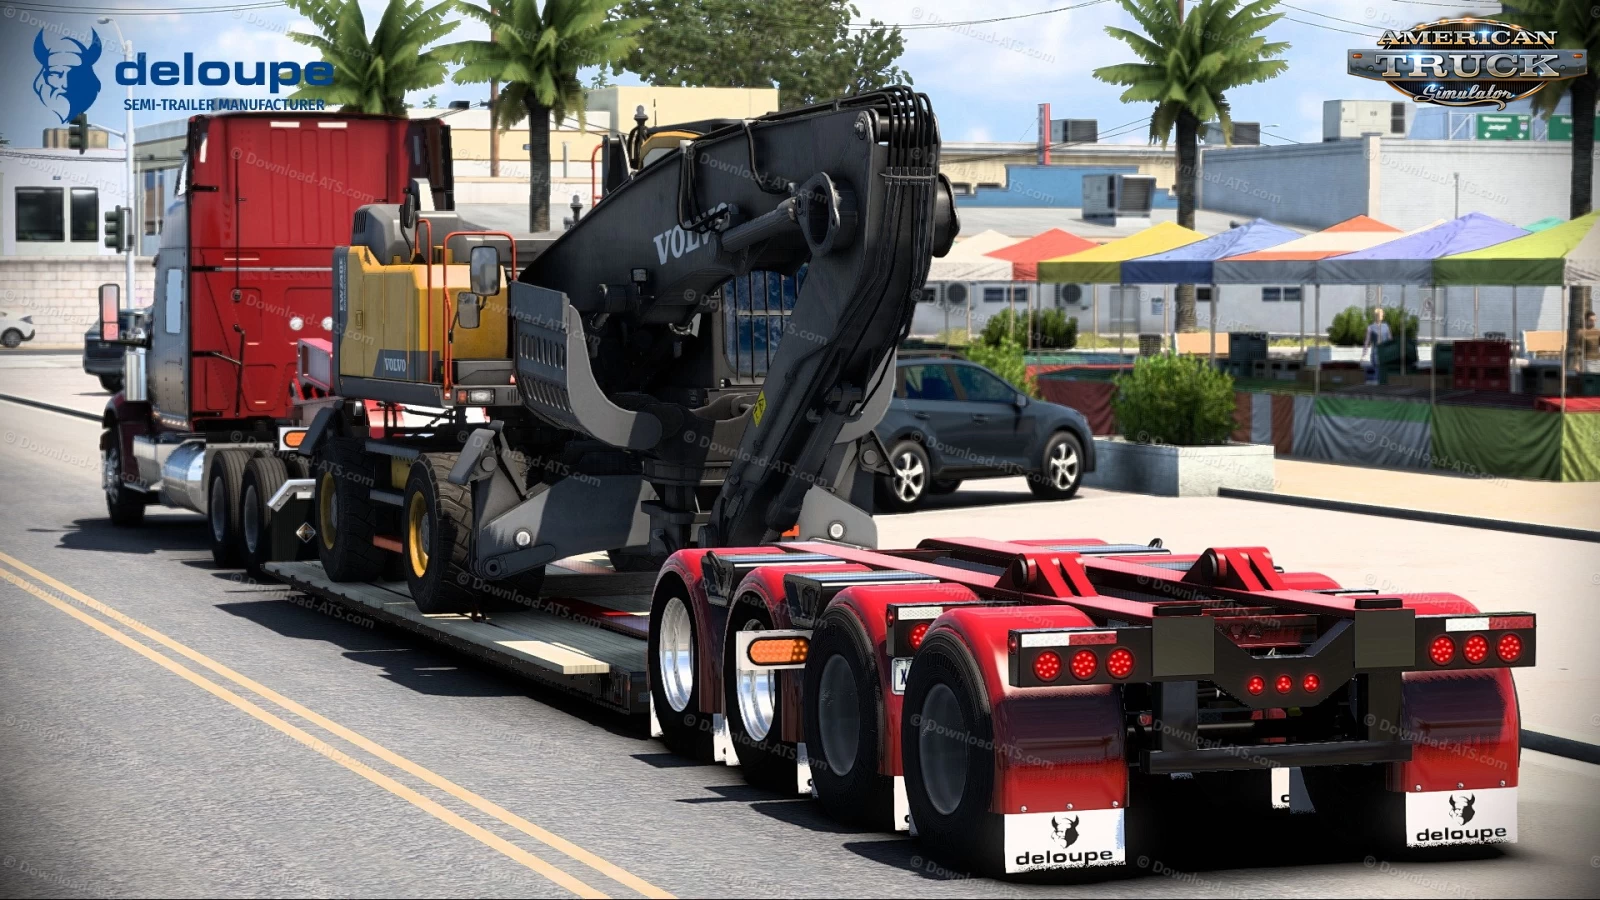 Corby Deloupe Lowboy Trailer v2.0 (1.43.x) for ATS